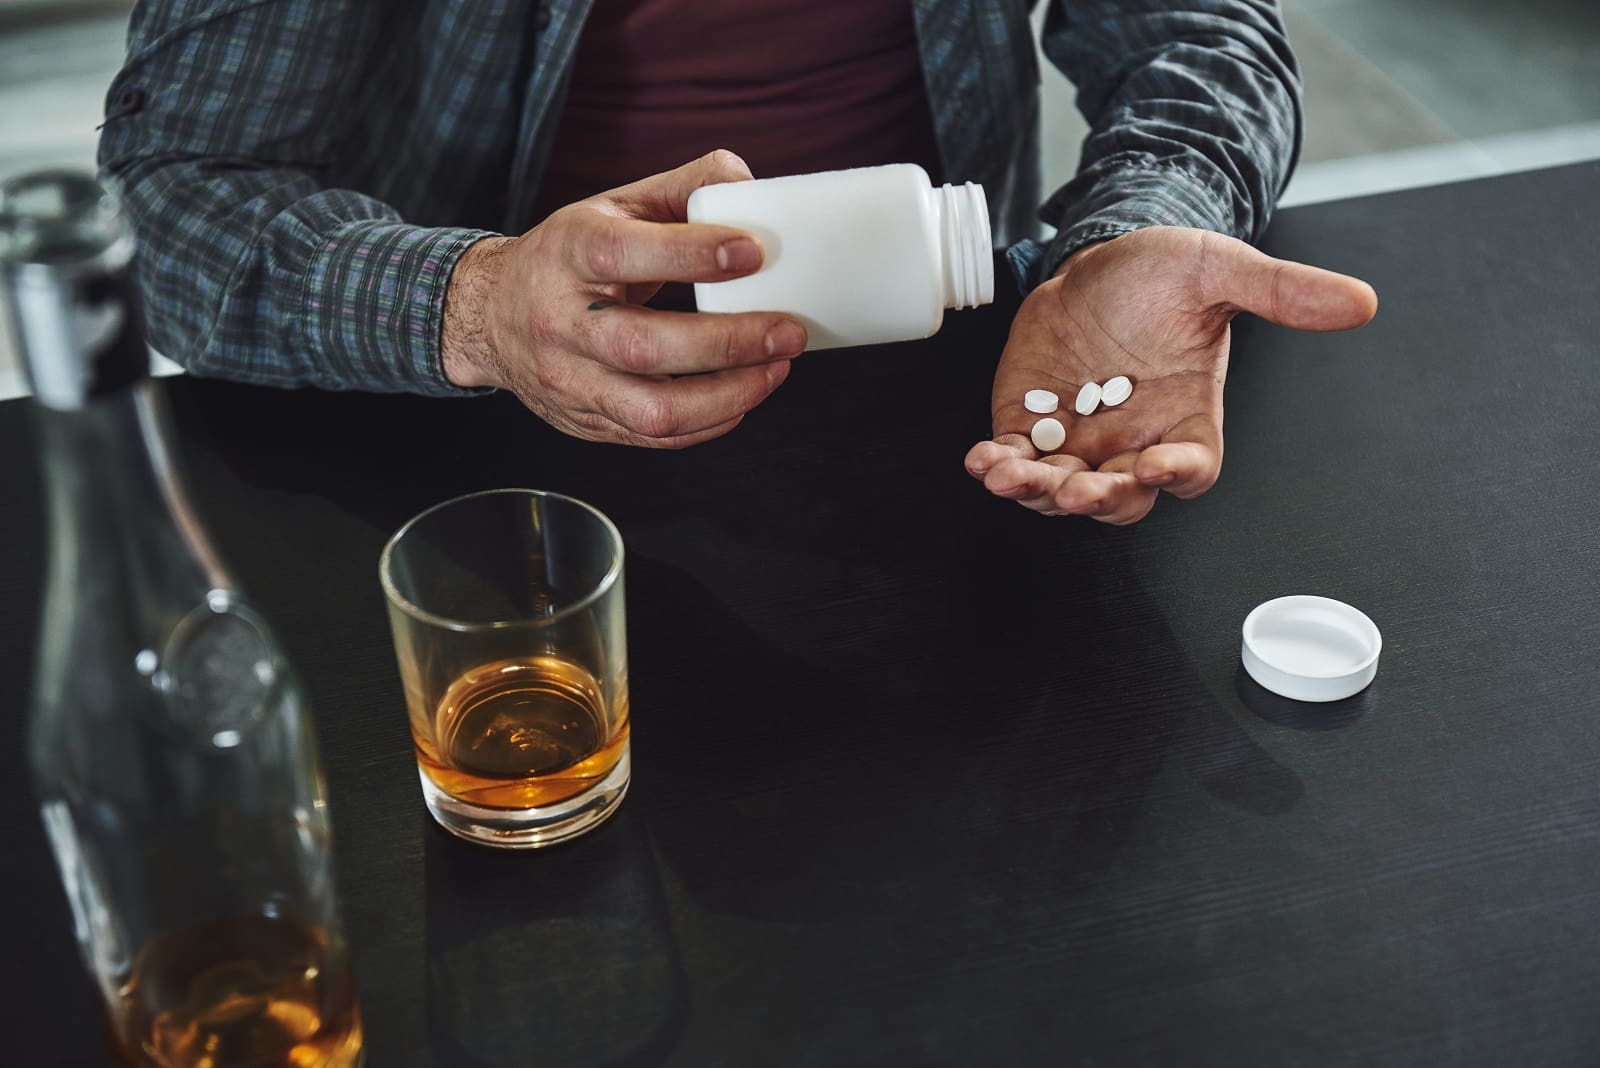 Combining alcohol and drugs can lead to increased side effects from both drugs